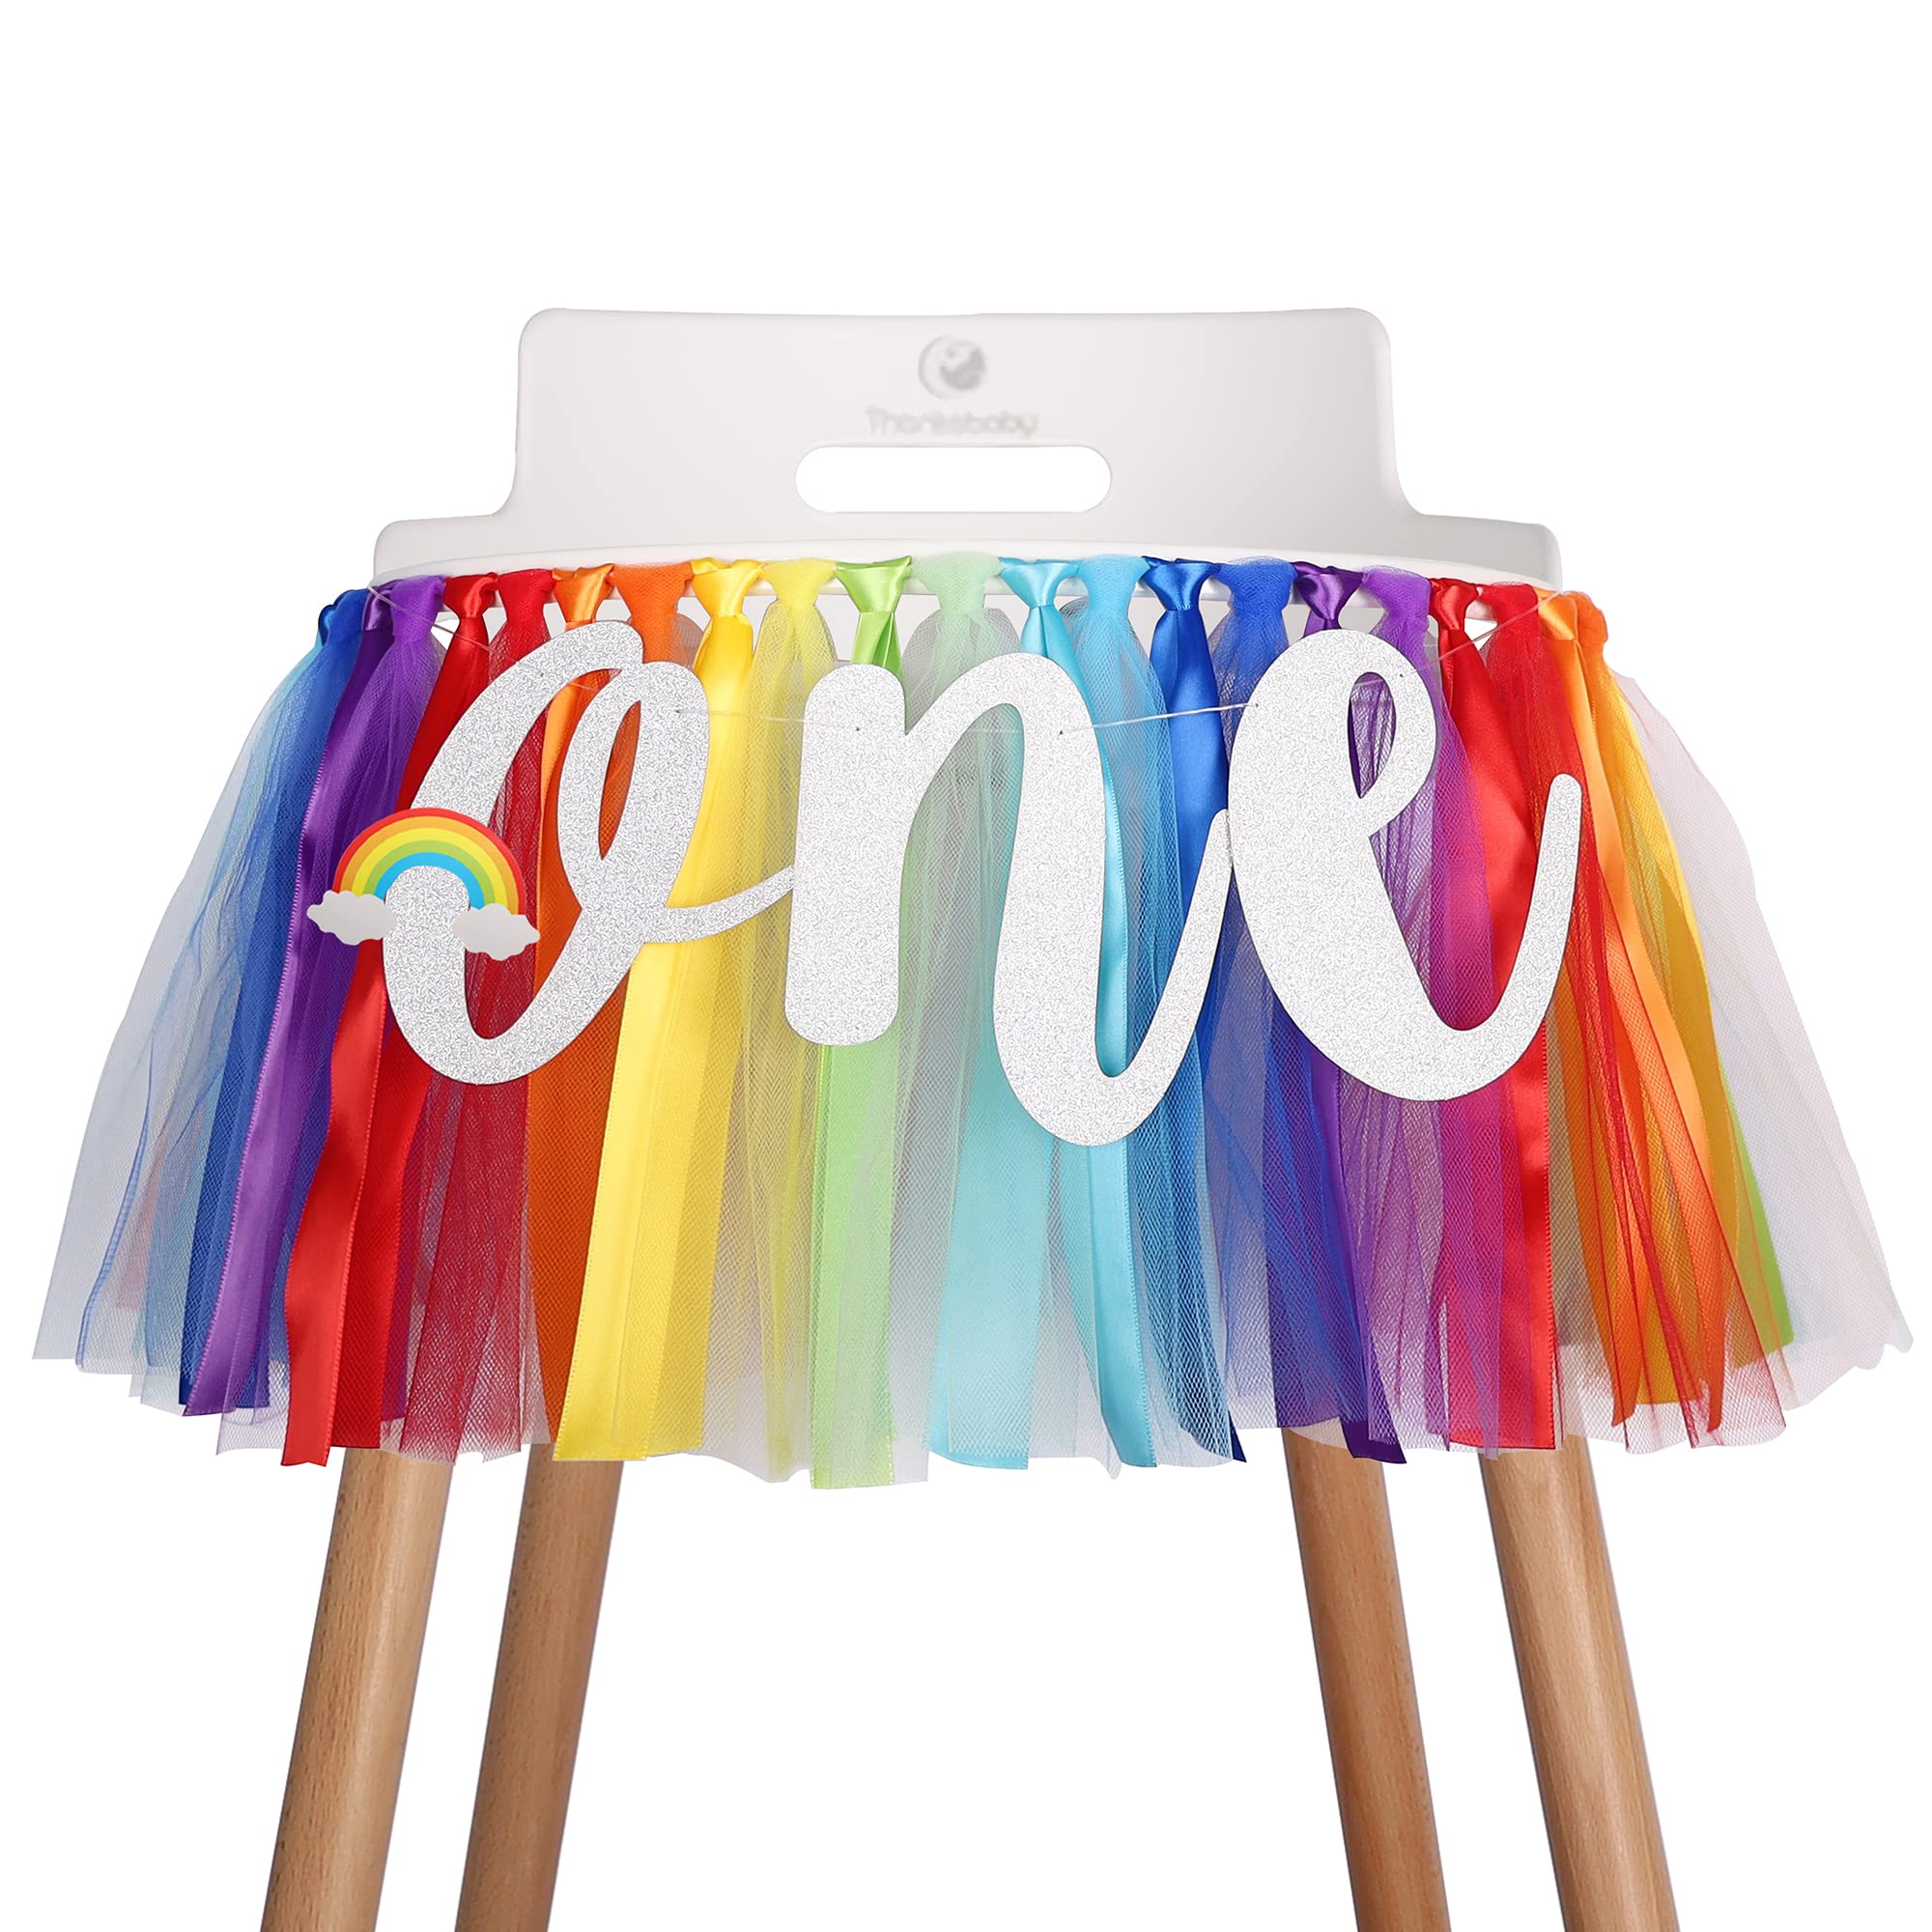 MIAUL Rainbow Highchair Banner Decoration for Baby - Party Theme Pull Flag, High Chair Fabric Garland, One First Birthday Banner, Phot